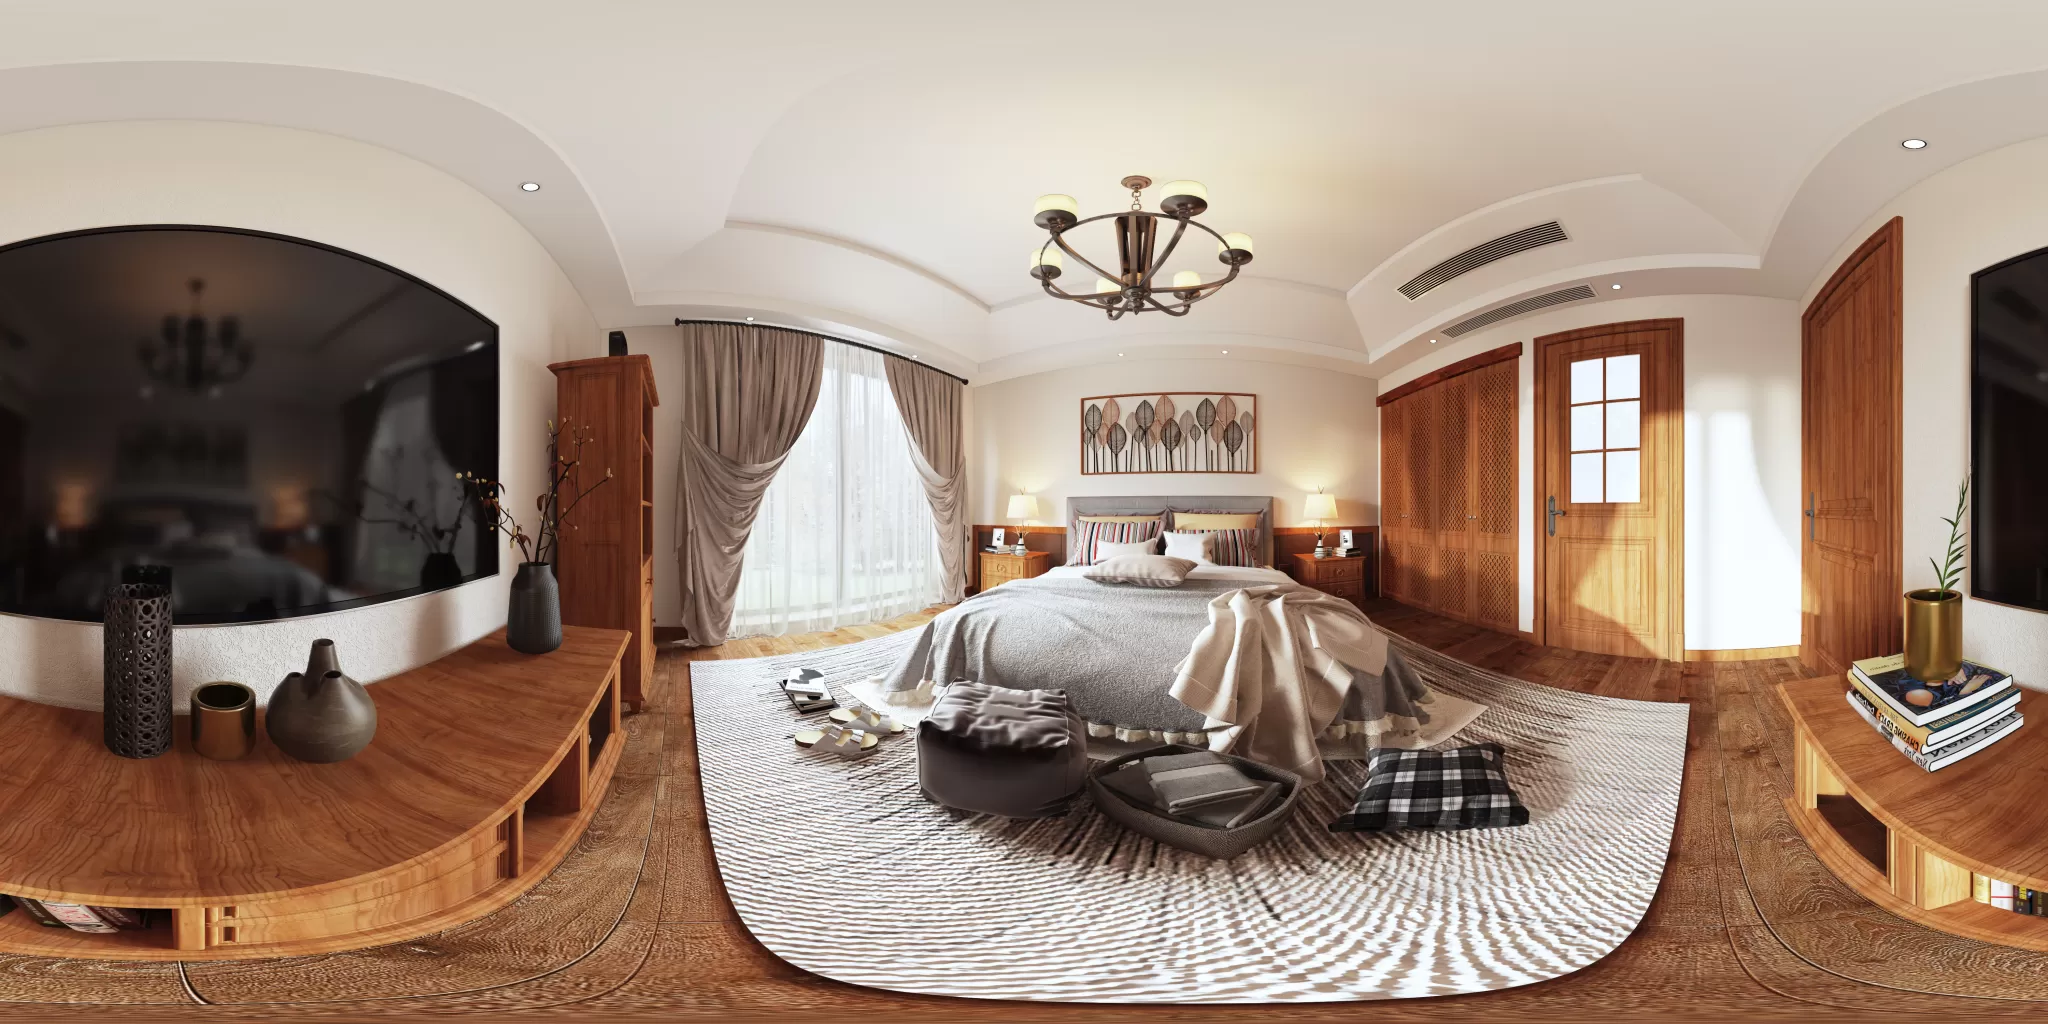 DESMOD INTERIOR 2021 (VRAY)/5. BEDROOM – 2. CHINESE STYLES – 156 (1)